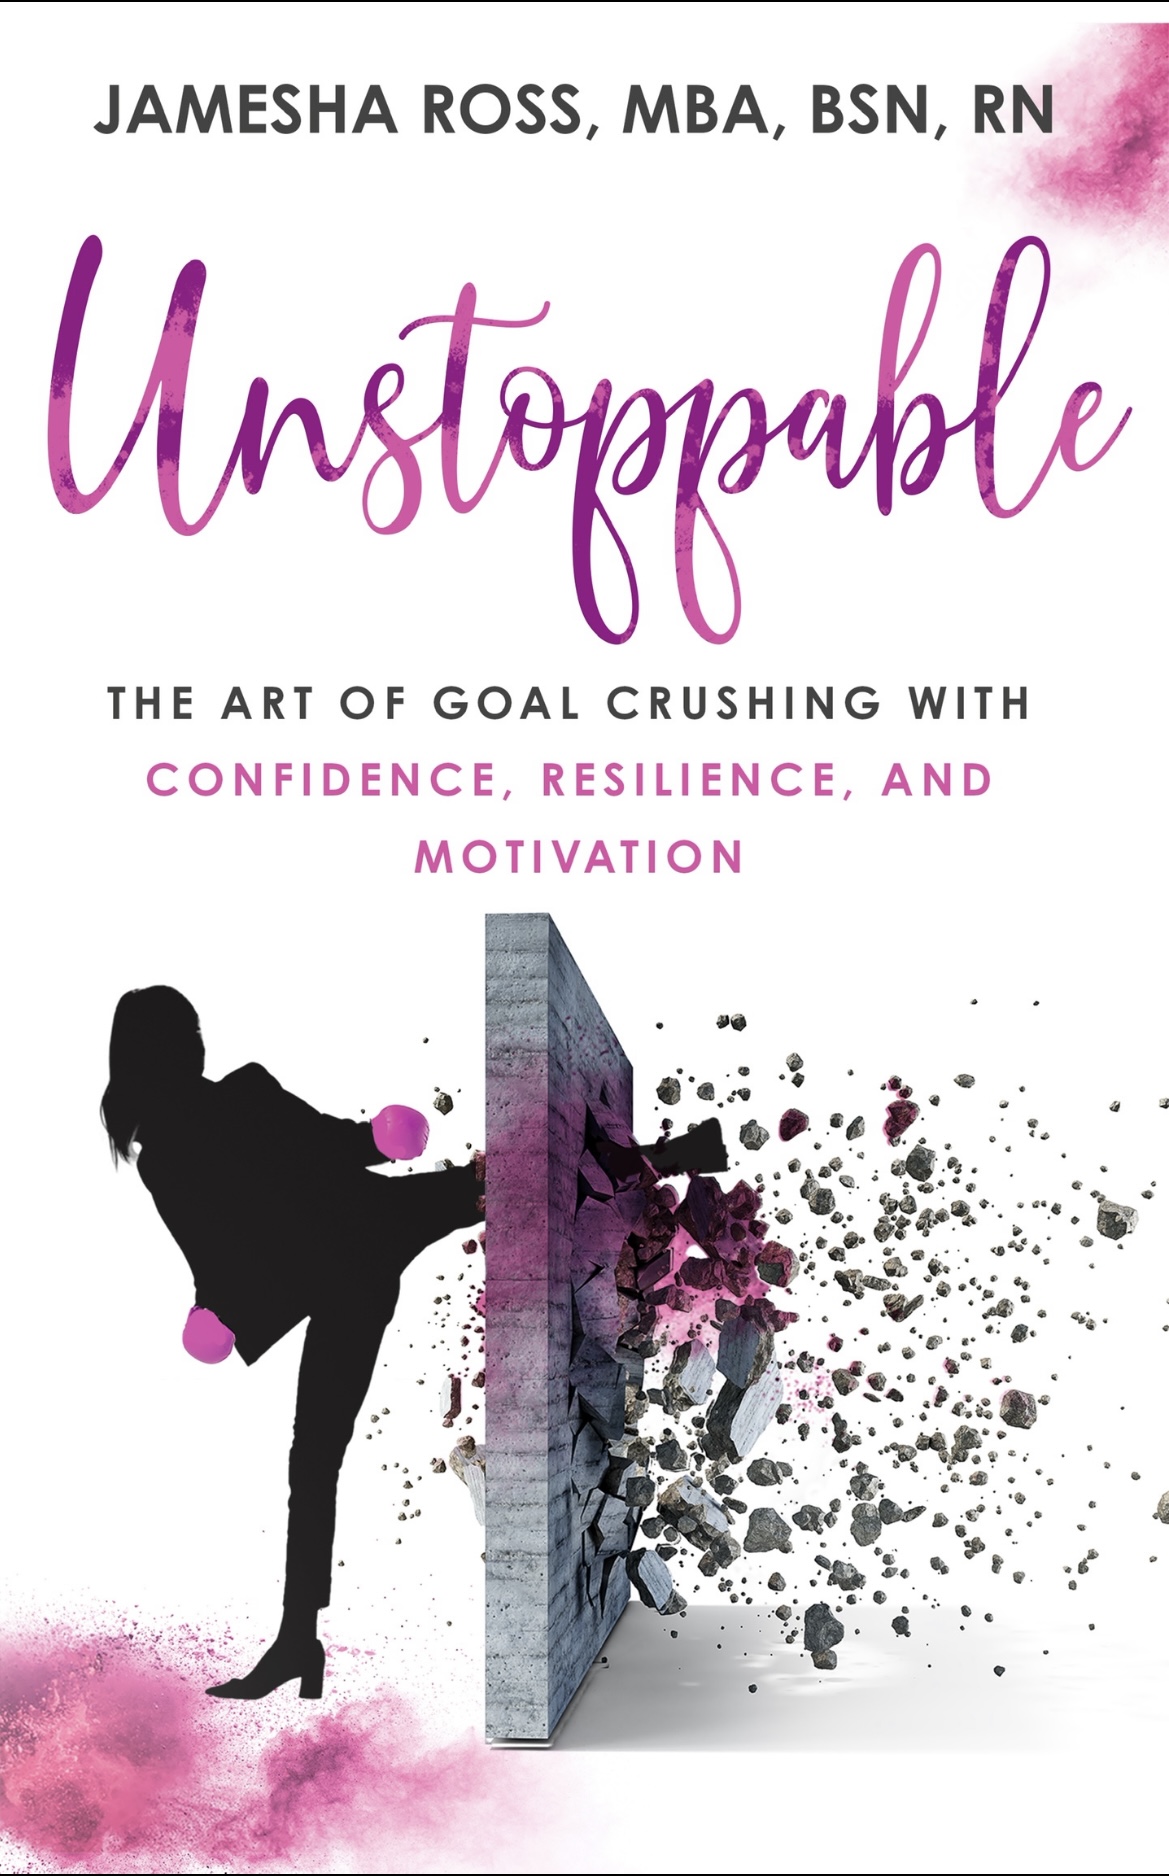 Jamesha Ross Launches New Book With An Aim to Help Women Struggling With Procrastination Achieve Their Goals